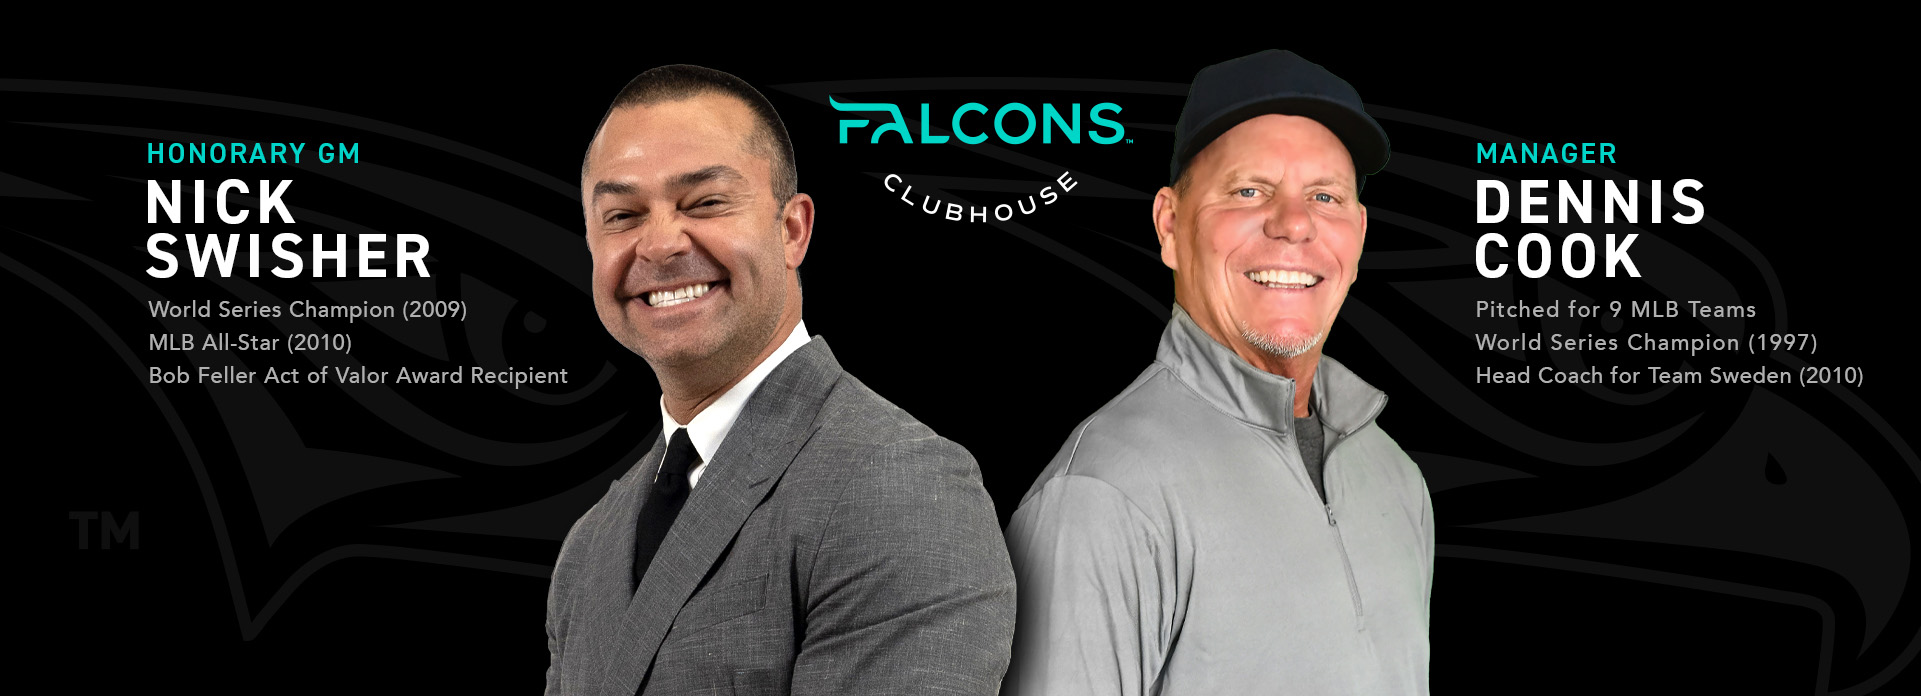 Falcons Managers